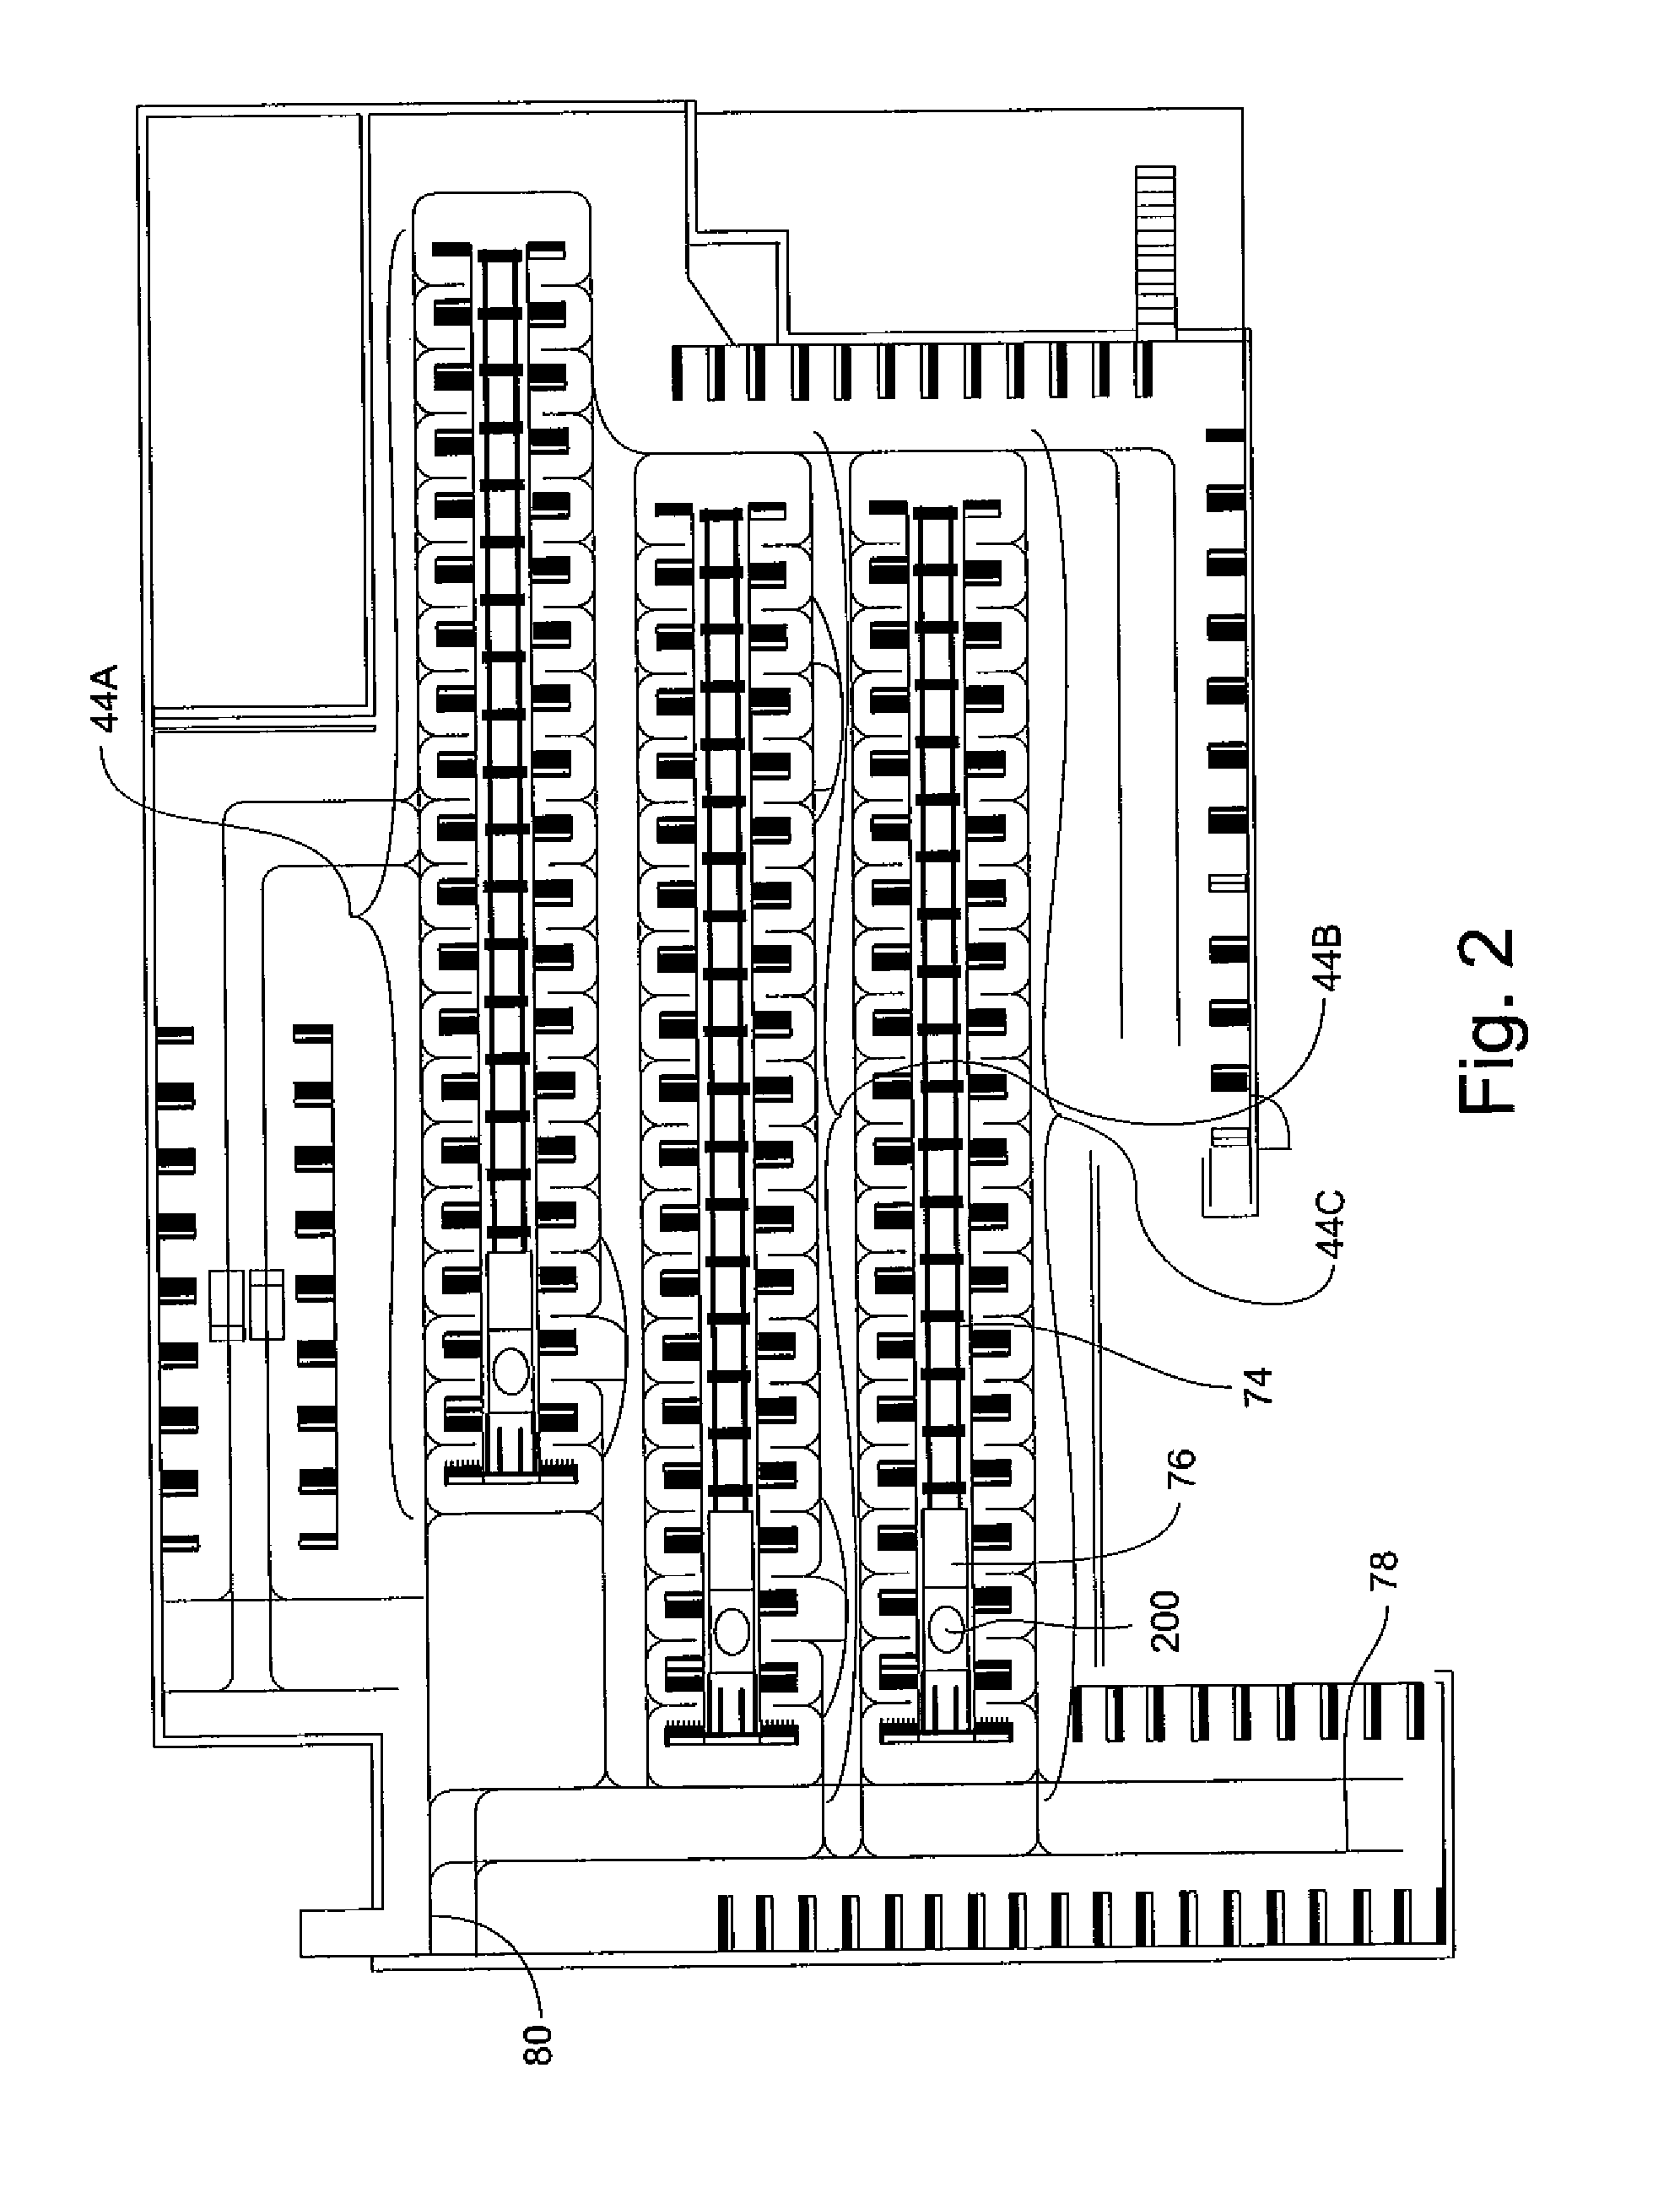 Palletizing systems and methods